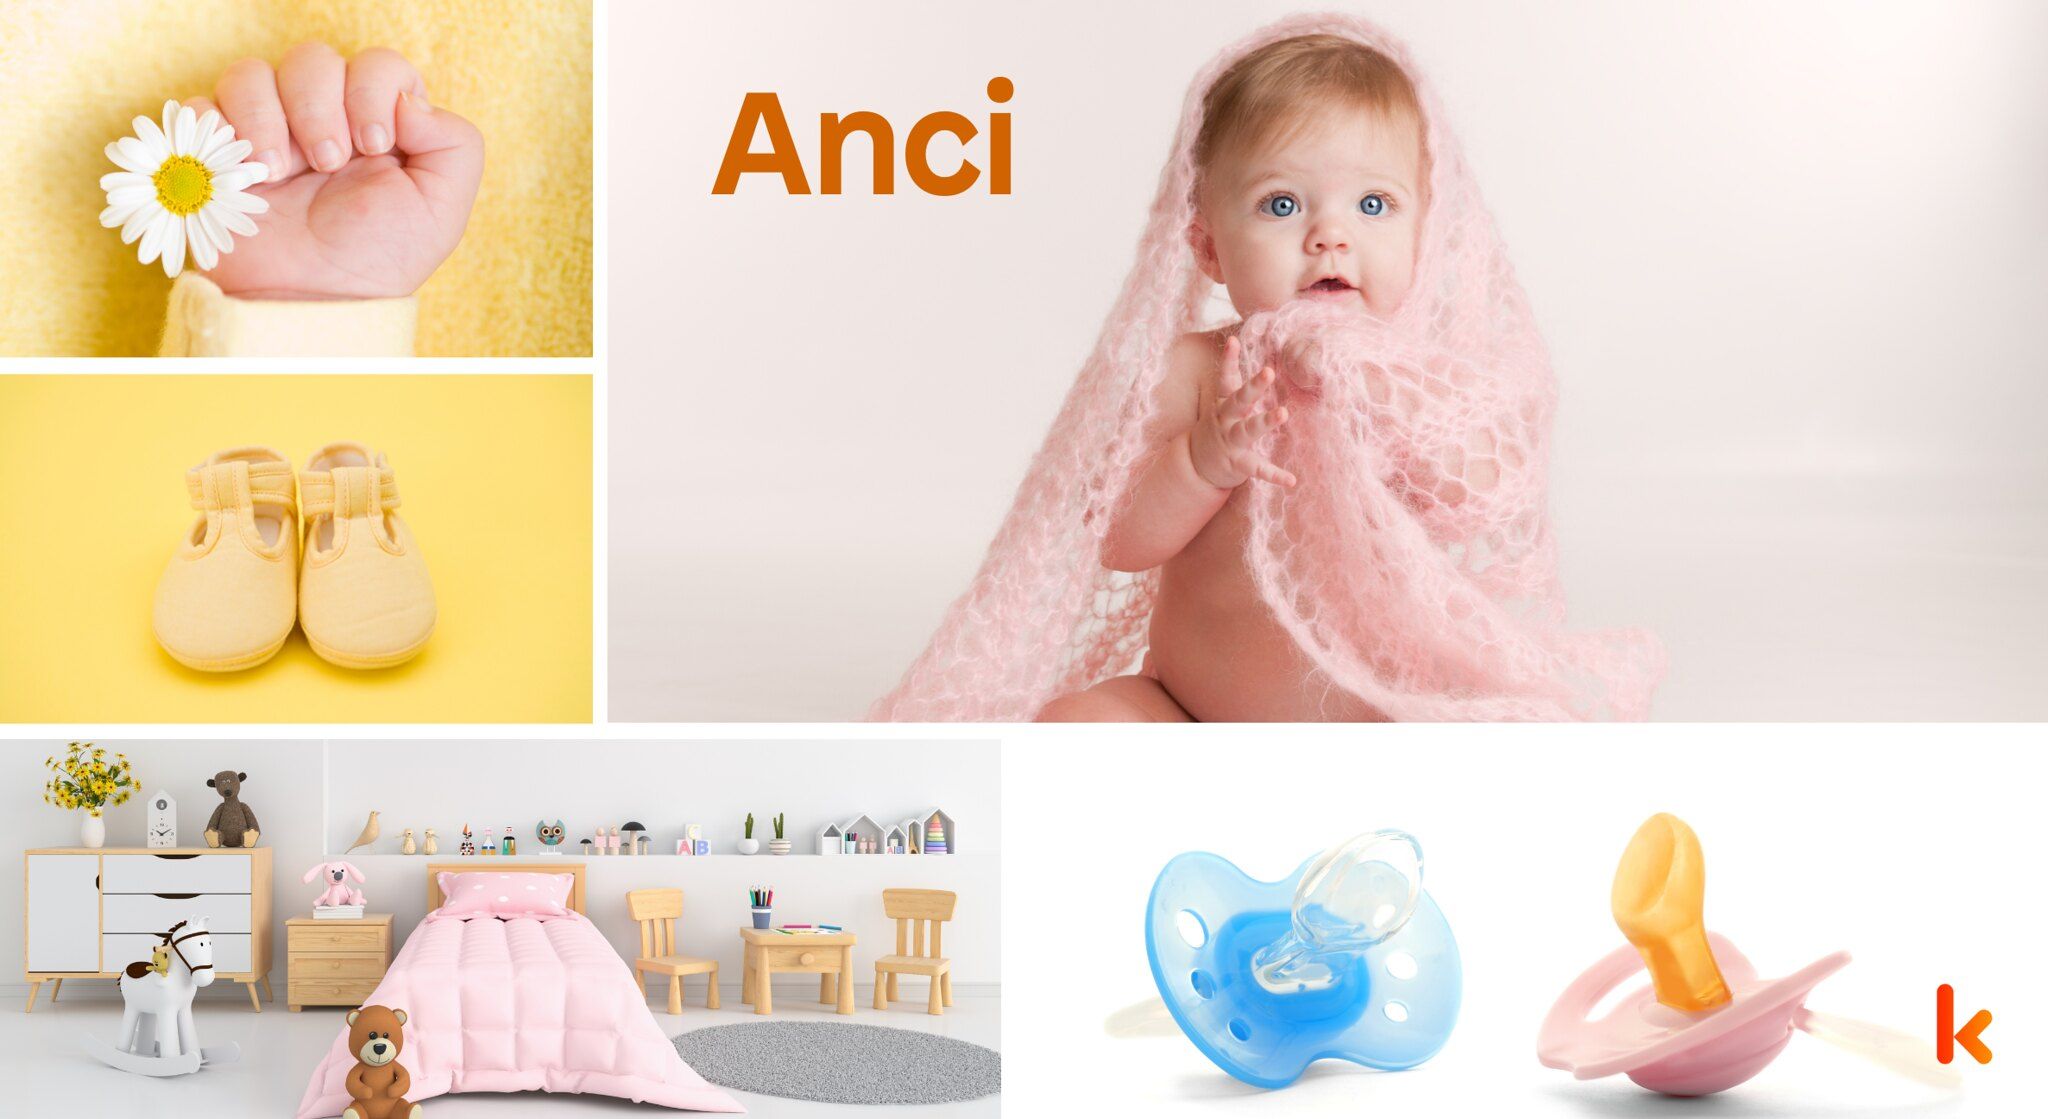 Meaning of the name Anci